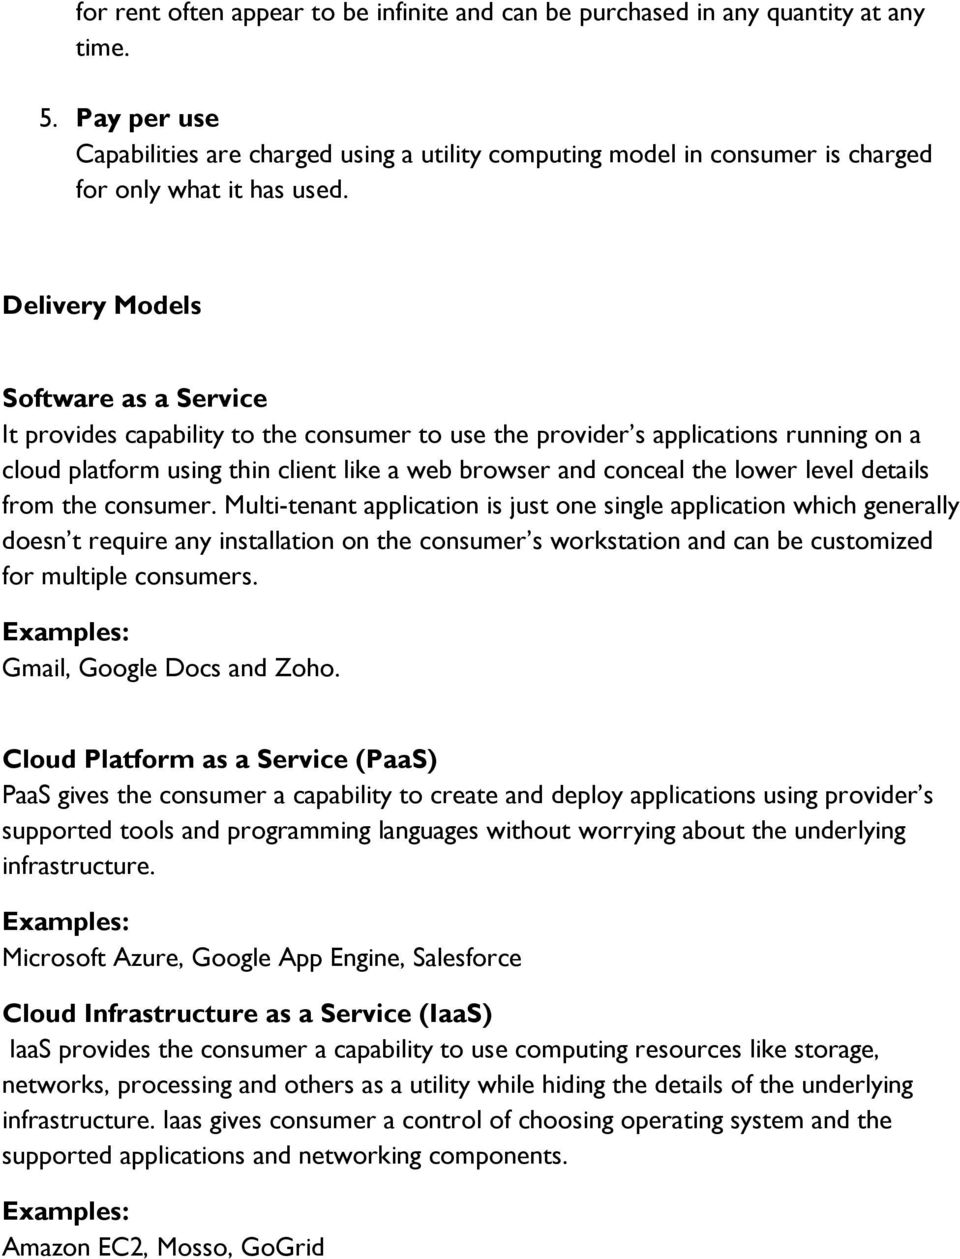 Delivery Models Software as a Service It provides capability to the consumer to use the provider s applications running on a cloud platform using thin client like a web browser and conceal the lower